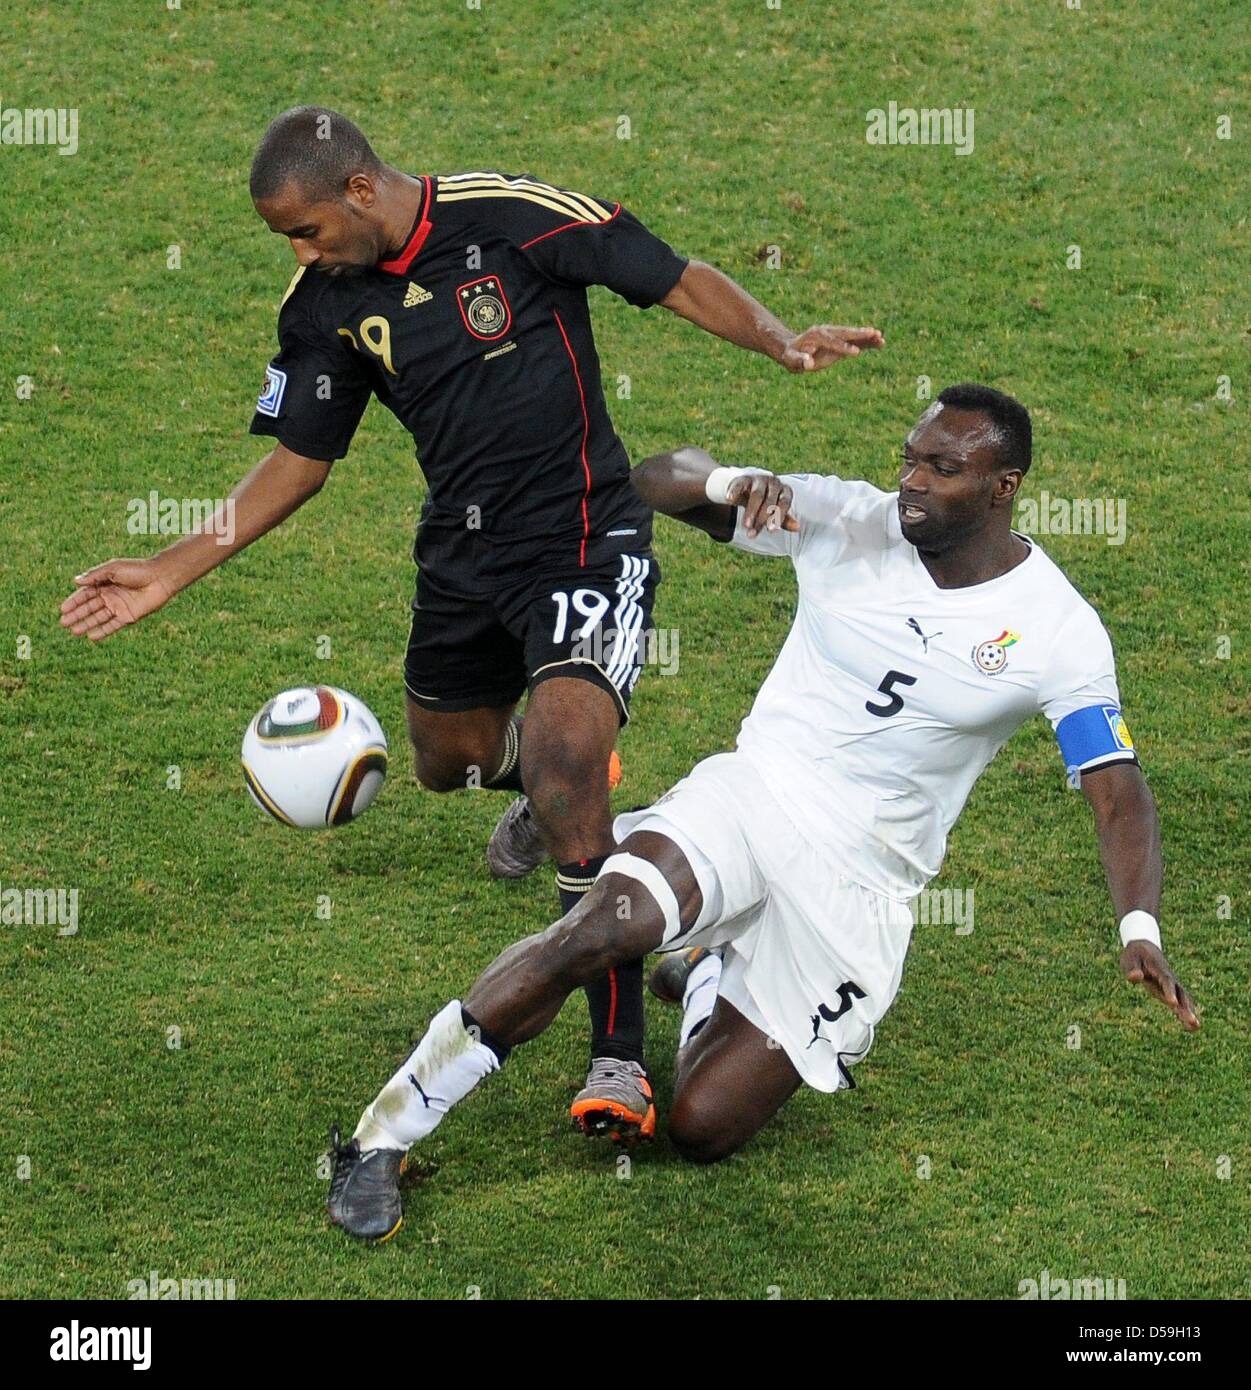 Germany's Cacau (L) and Ghana's John Mensah vie for the ball during the 2010 FIFA World Cup group D match between Ghana and Germany at Soccer City, Johannesburg, South Africa 23 June 2010. Photo: Achim Scheidemann - Please refer to http://dpaq.de/FIFA-WM2010-TC Stock Photo